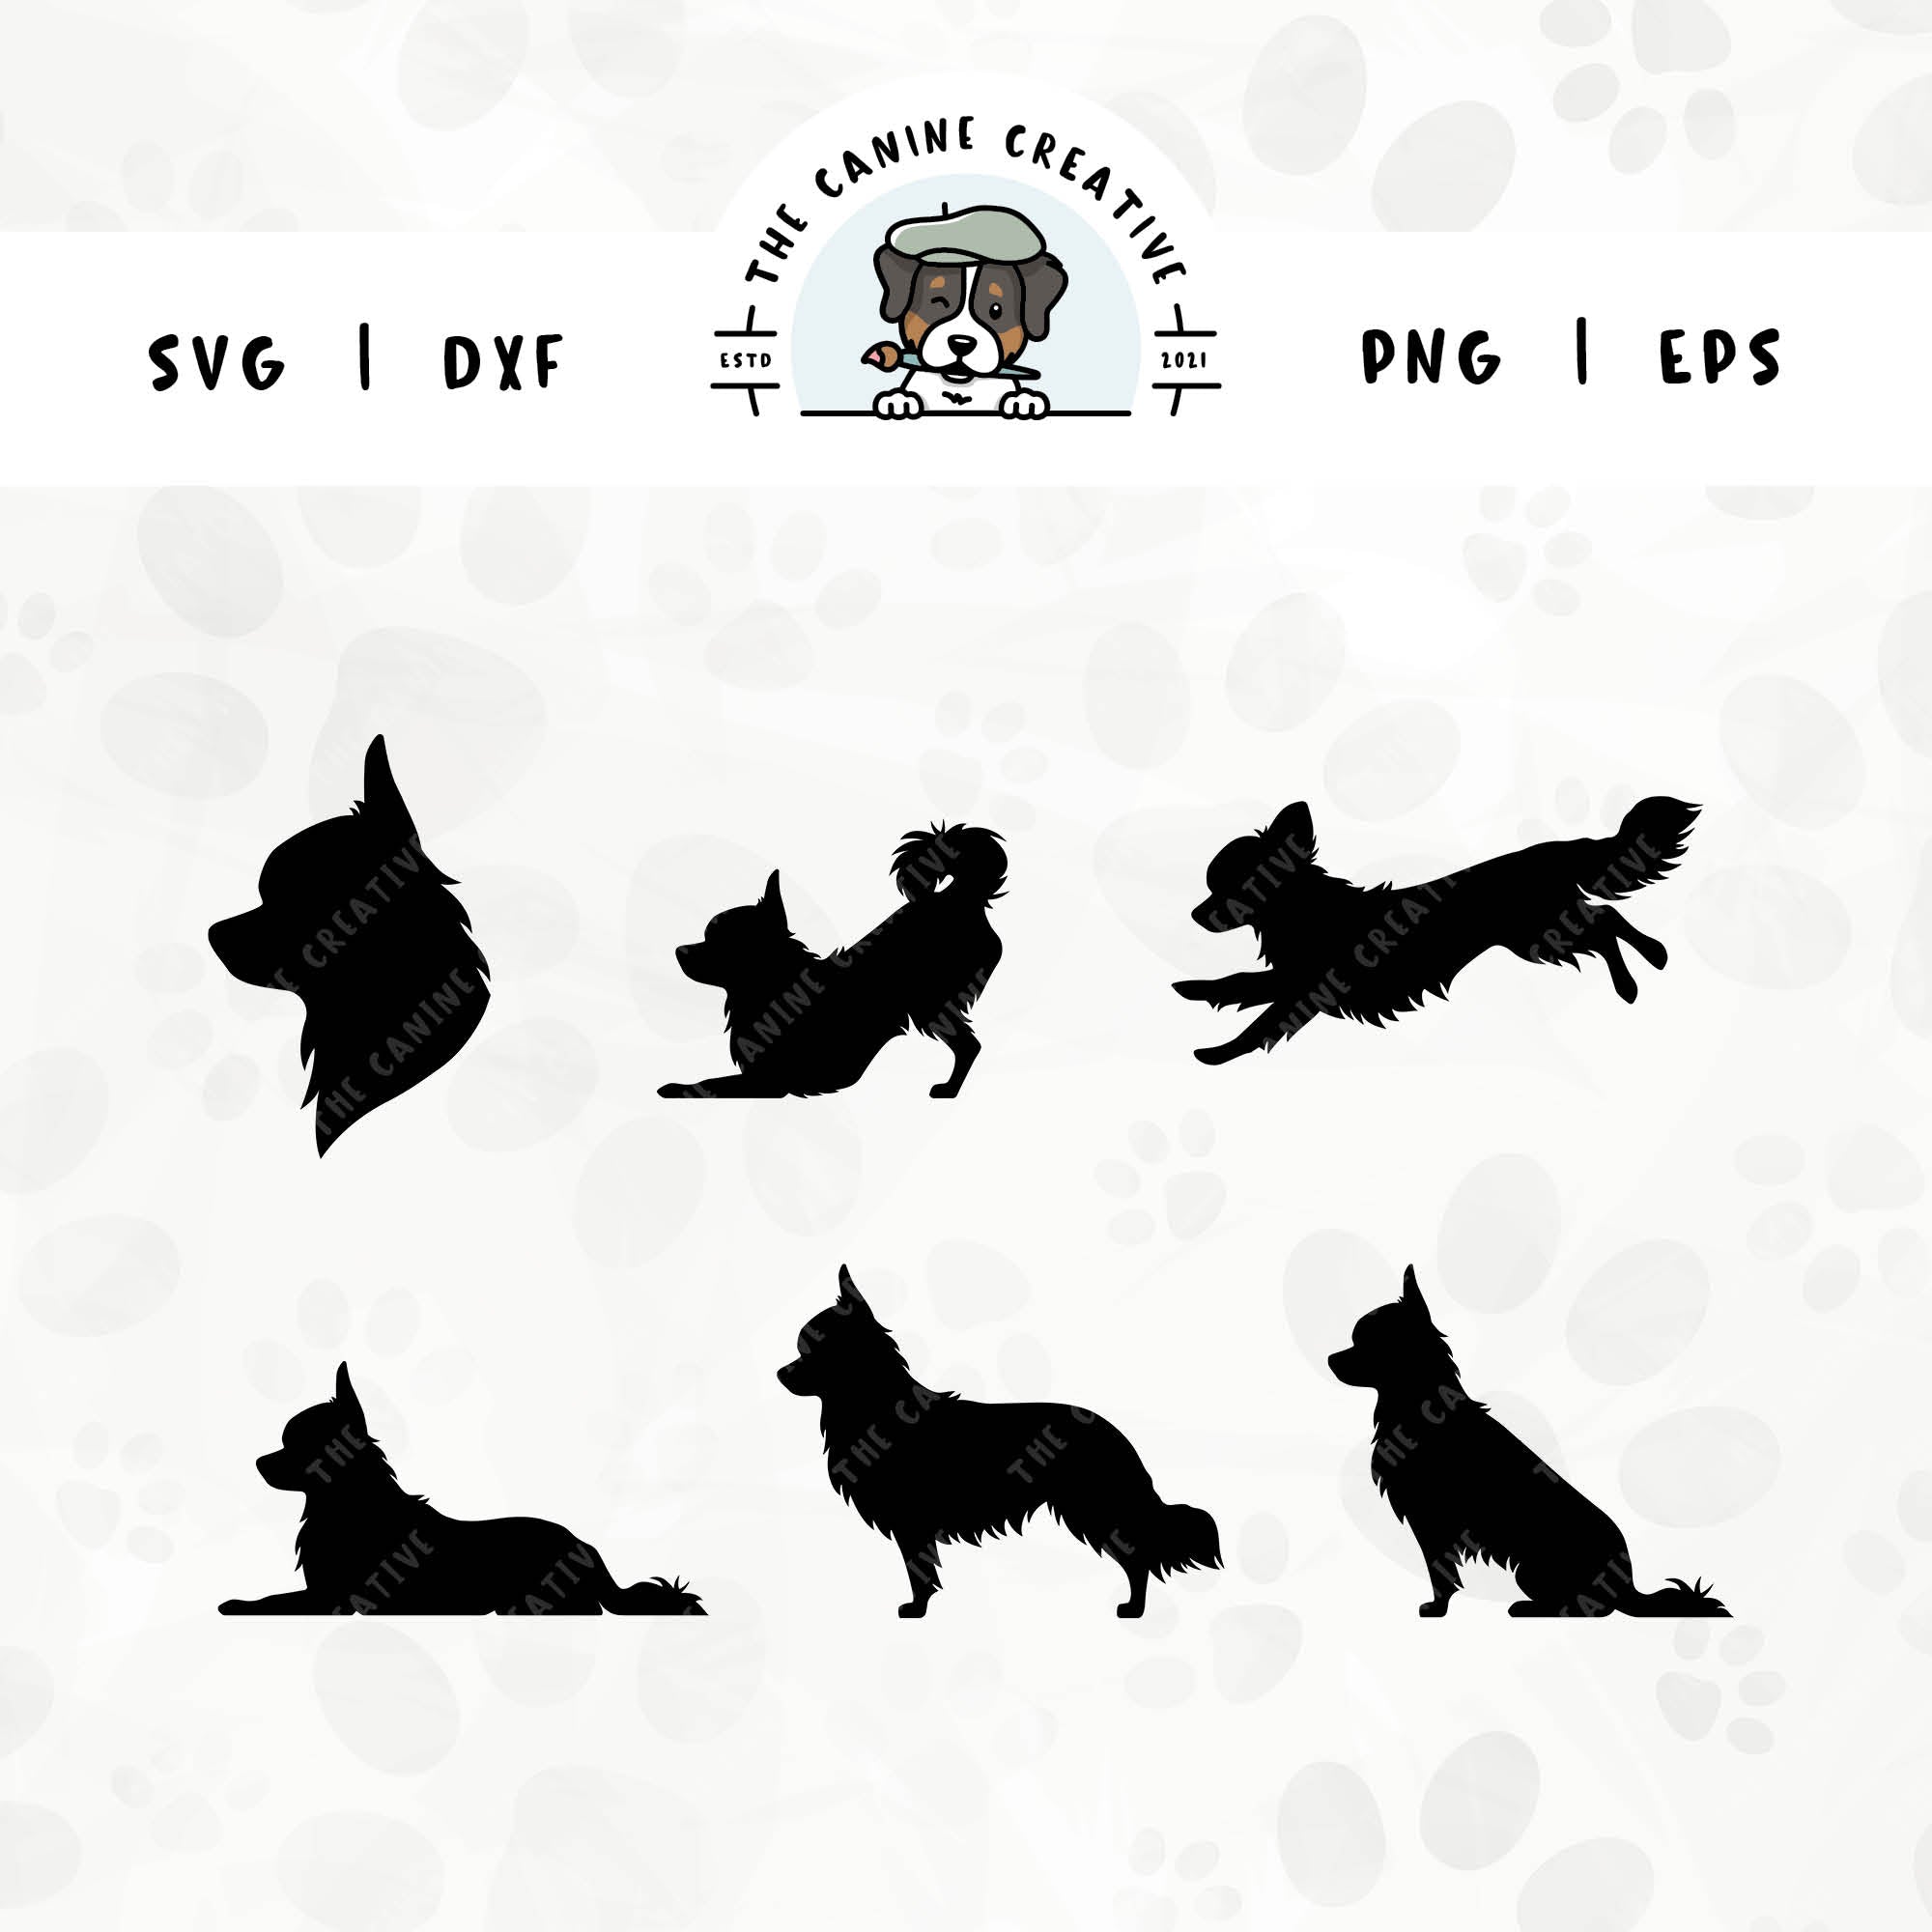 This 6-pack Long-Haired Chihuahua silhouette bundle (set 1) features a dog's head in profile, along with various poses including running, laying down, playing, standing, and sitting. File formats include: SVG, DXF, PNG, and EPS.